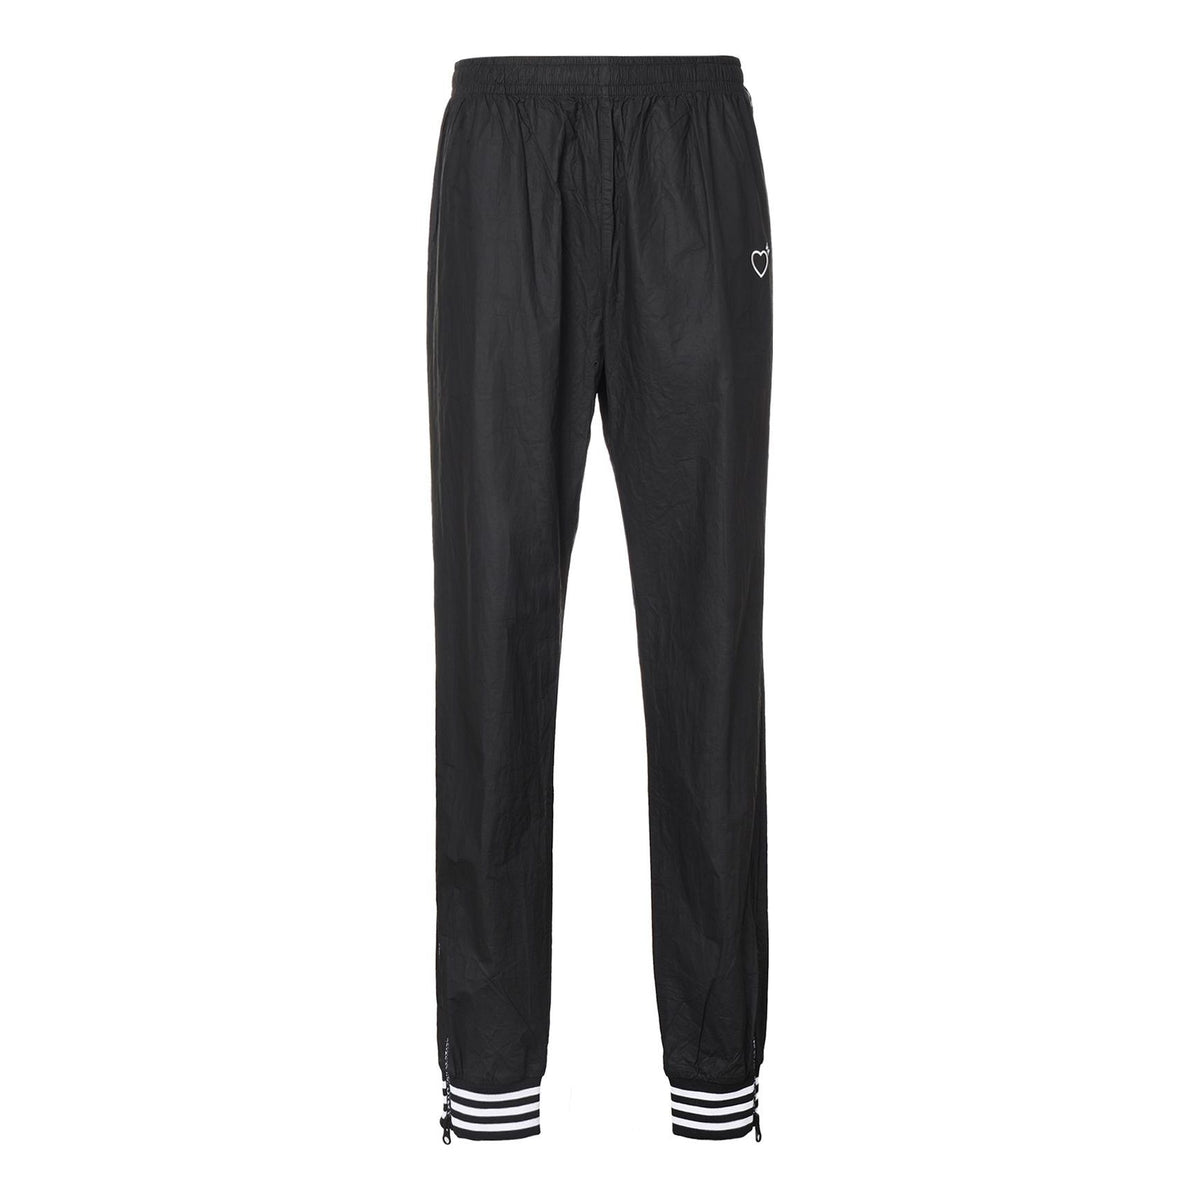 adidas originals x HUMAN MADE Crossover Embroidered Logo Sports Pants ...